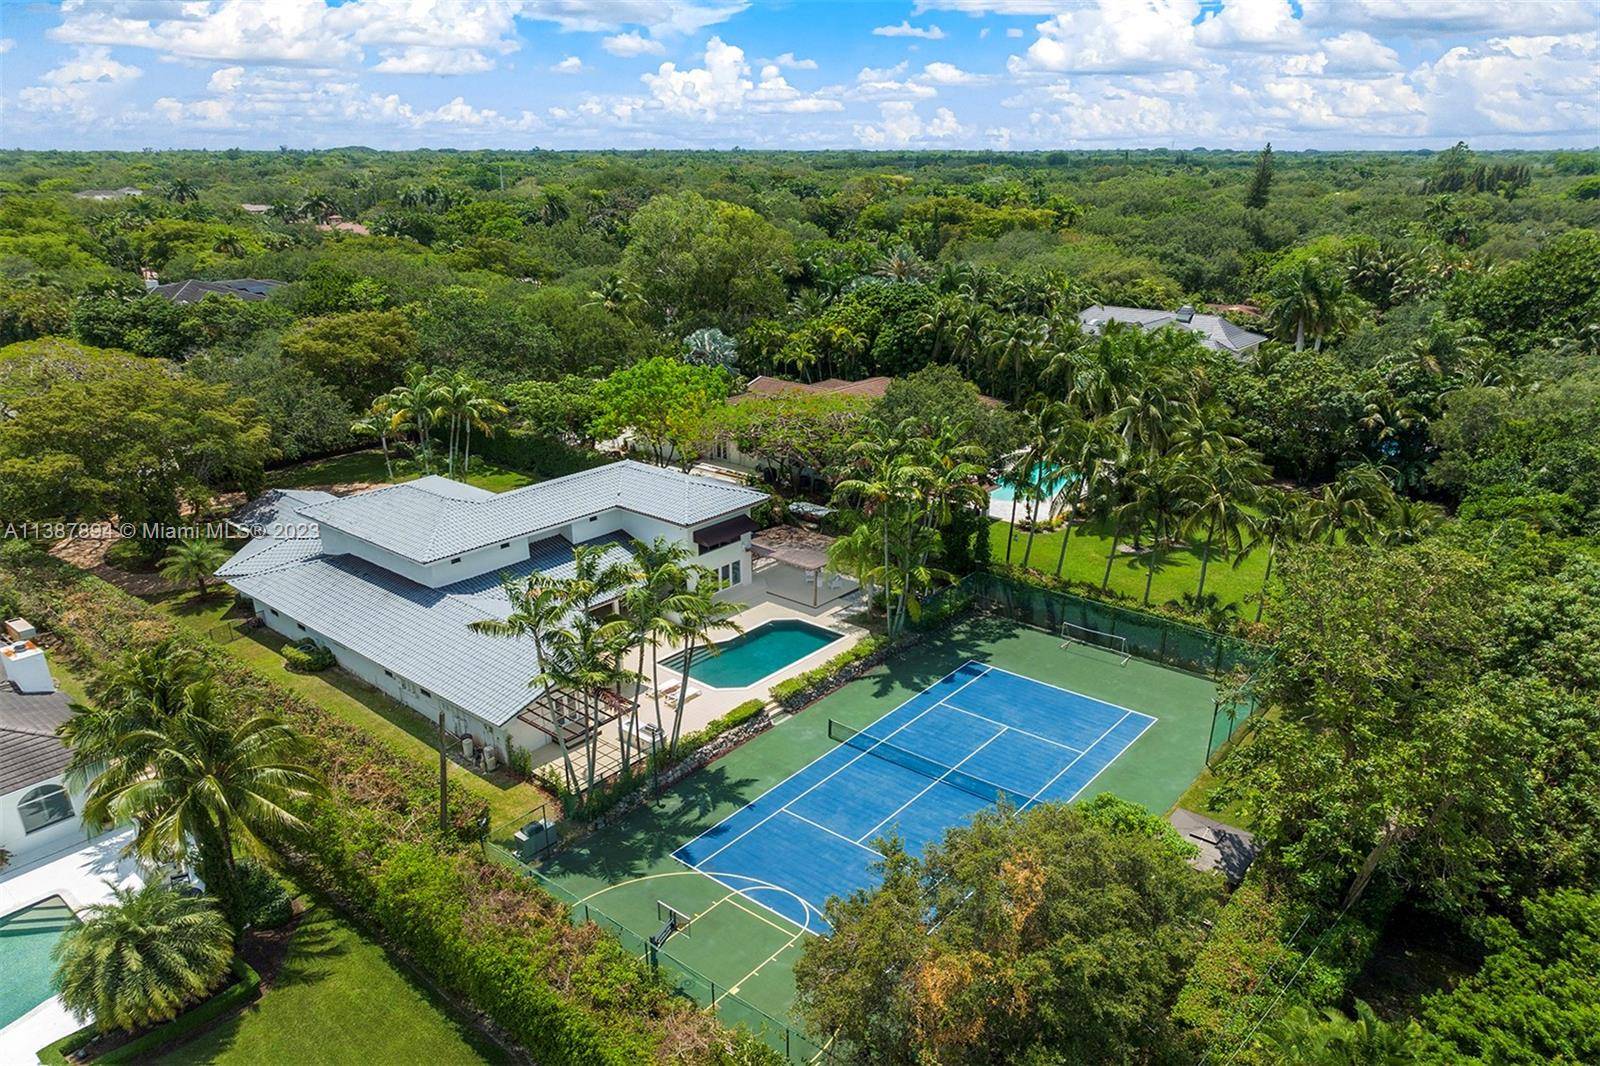 Discover an impressive one story home in North Pinecrest with a tennis court.